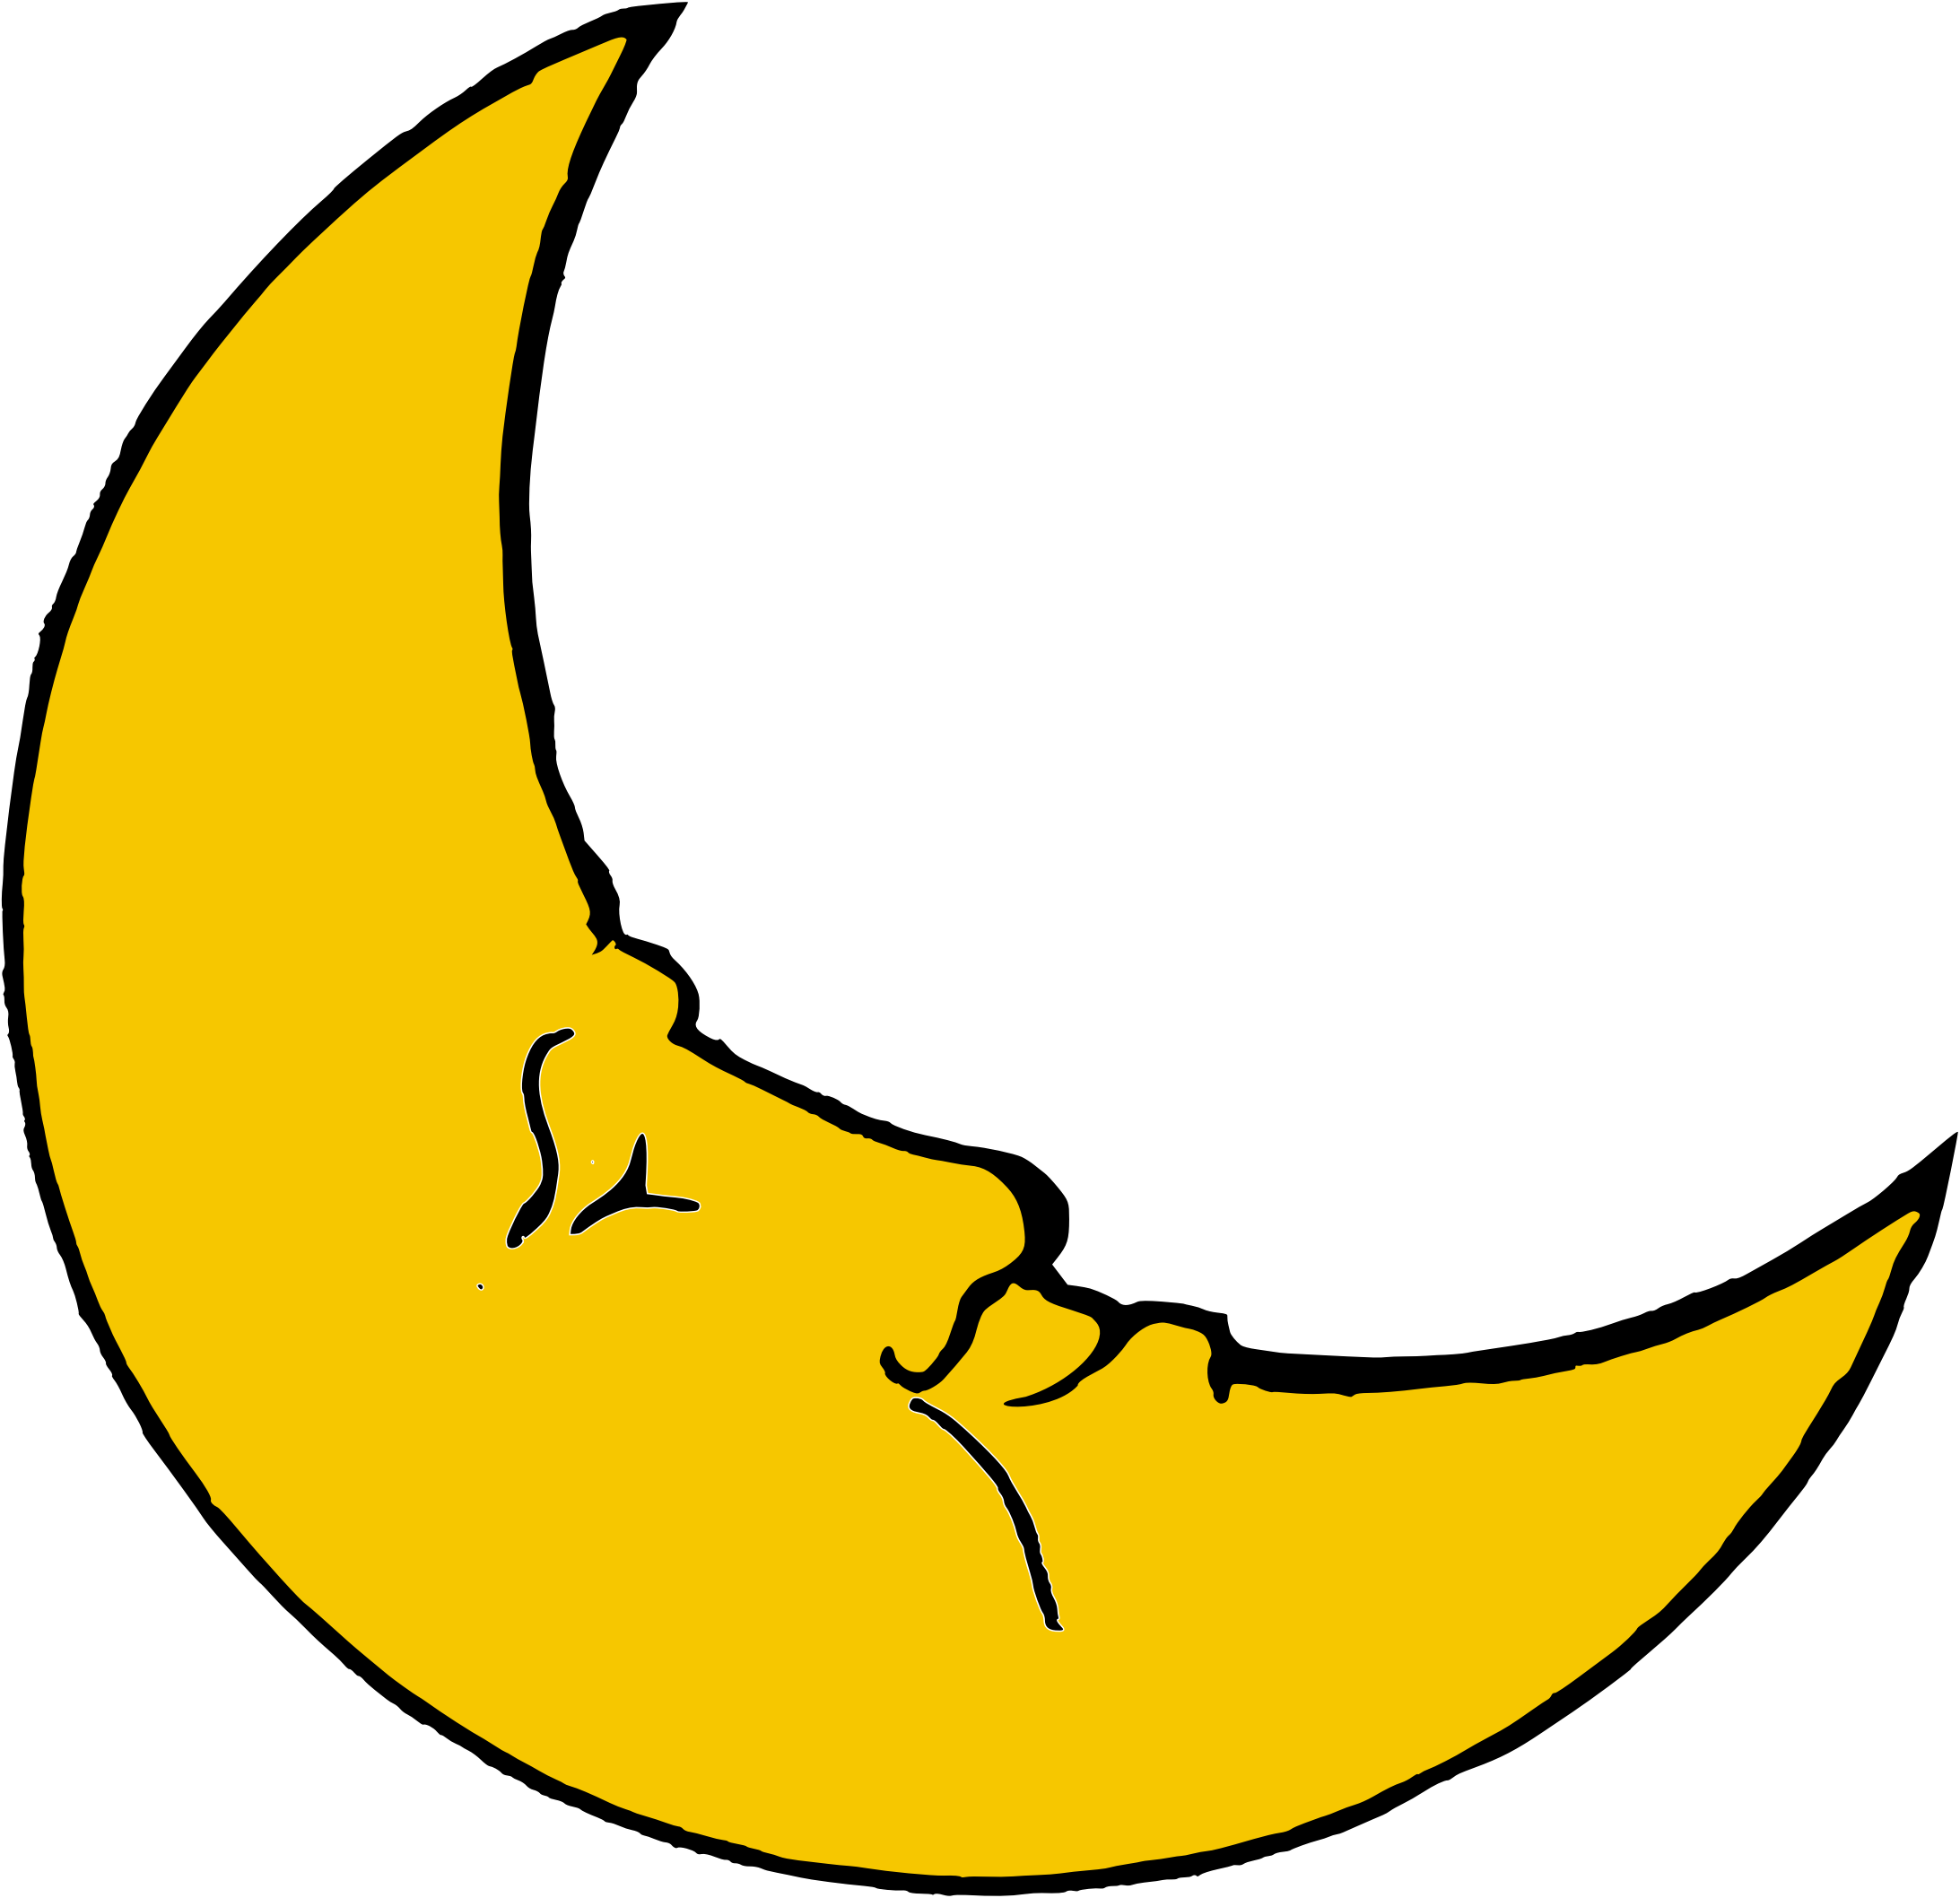 Moon clipart transparent background. Crescent image group smiling